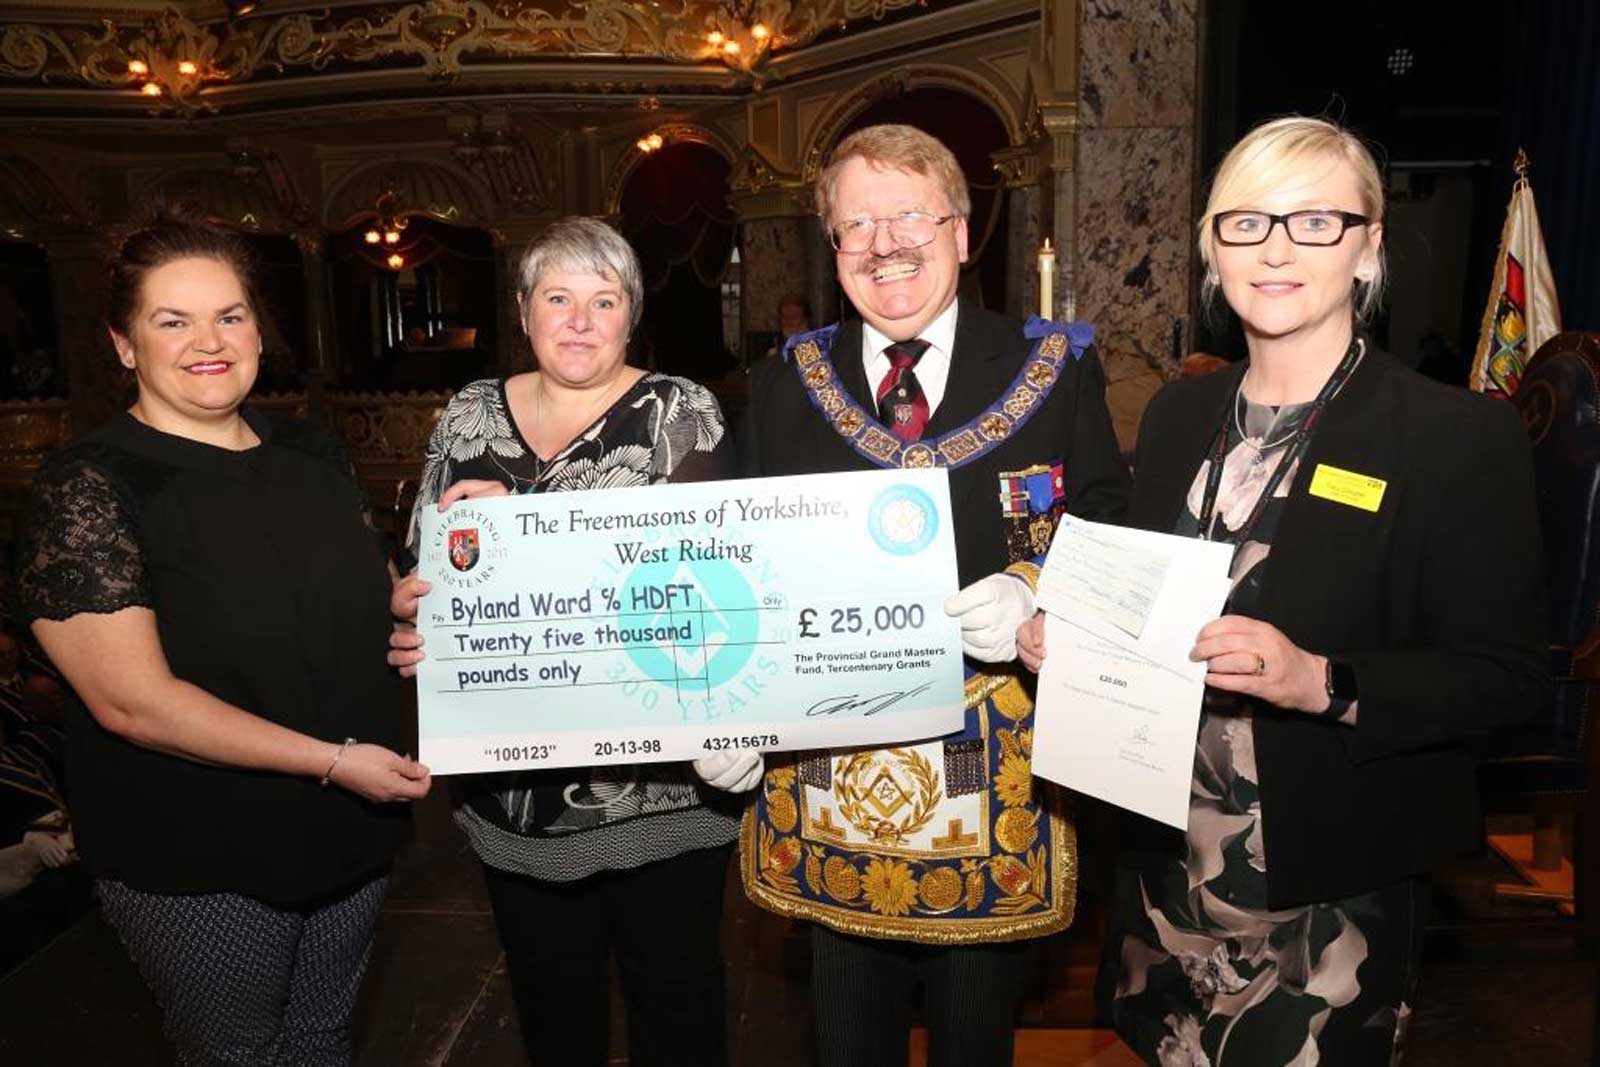 Major Contribution! The Provincial Grandmaster for the Province of Yorkshire West Riding, David S Pratt, with Byland Ward representatives Tammy Gotts, Adele Dungey and Tracy Campbell